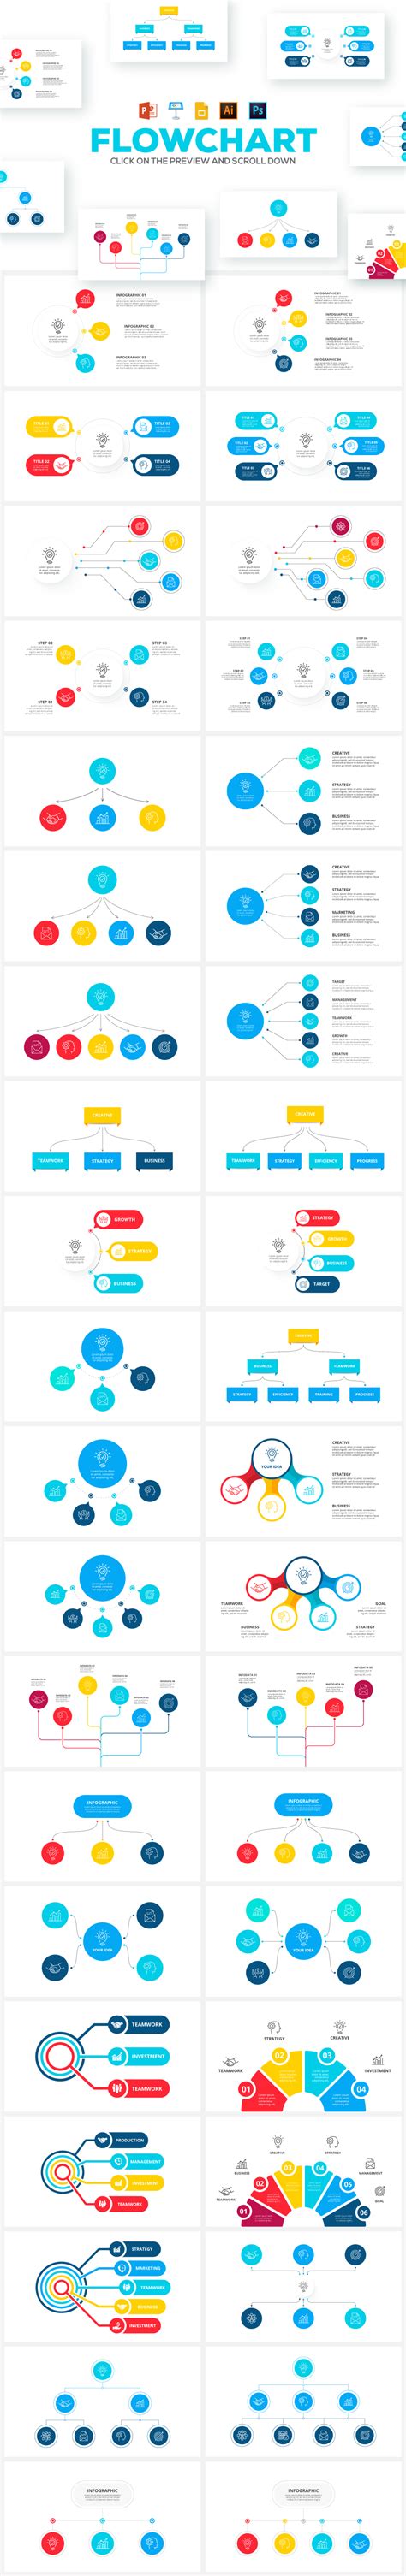 40 Animated Flow Chart Templates Animated Flowchart Maker By Images